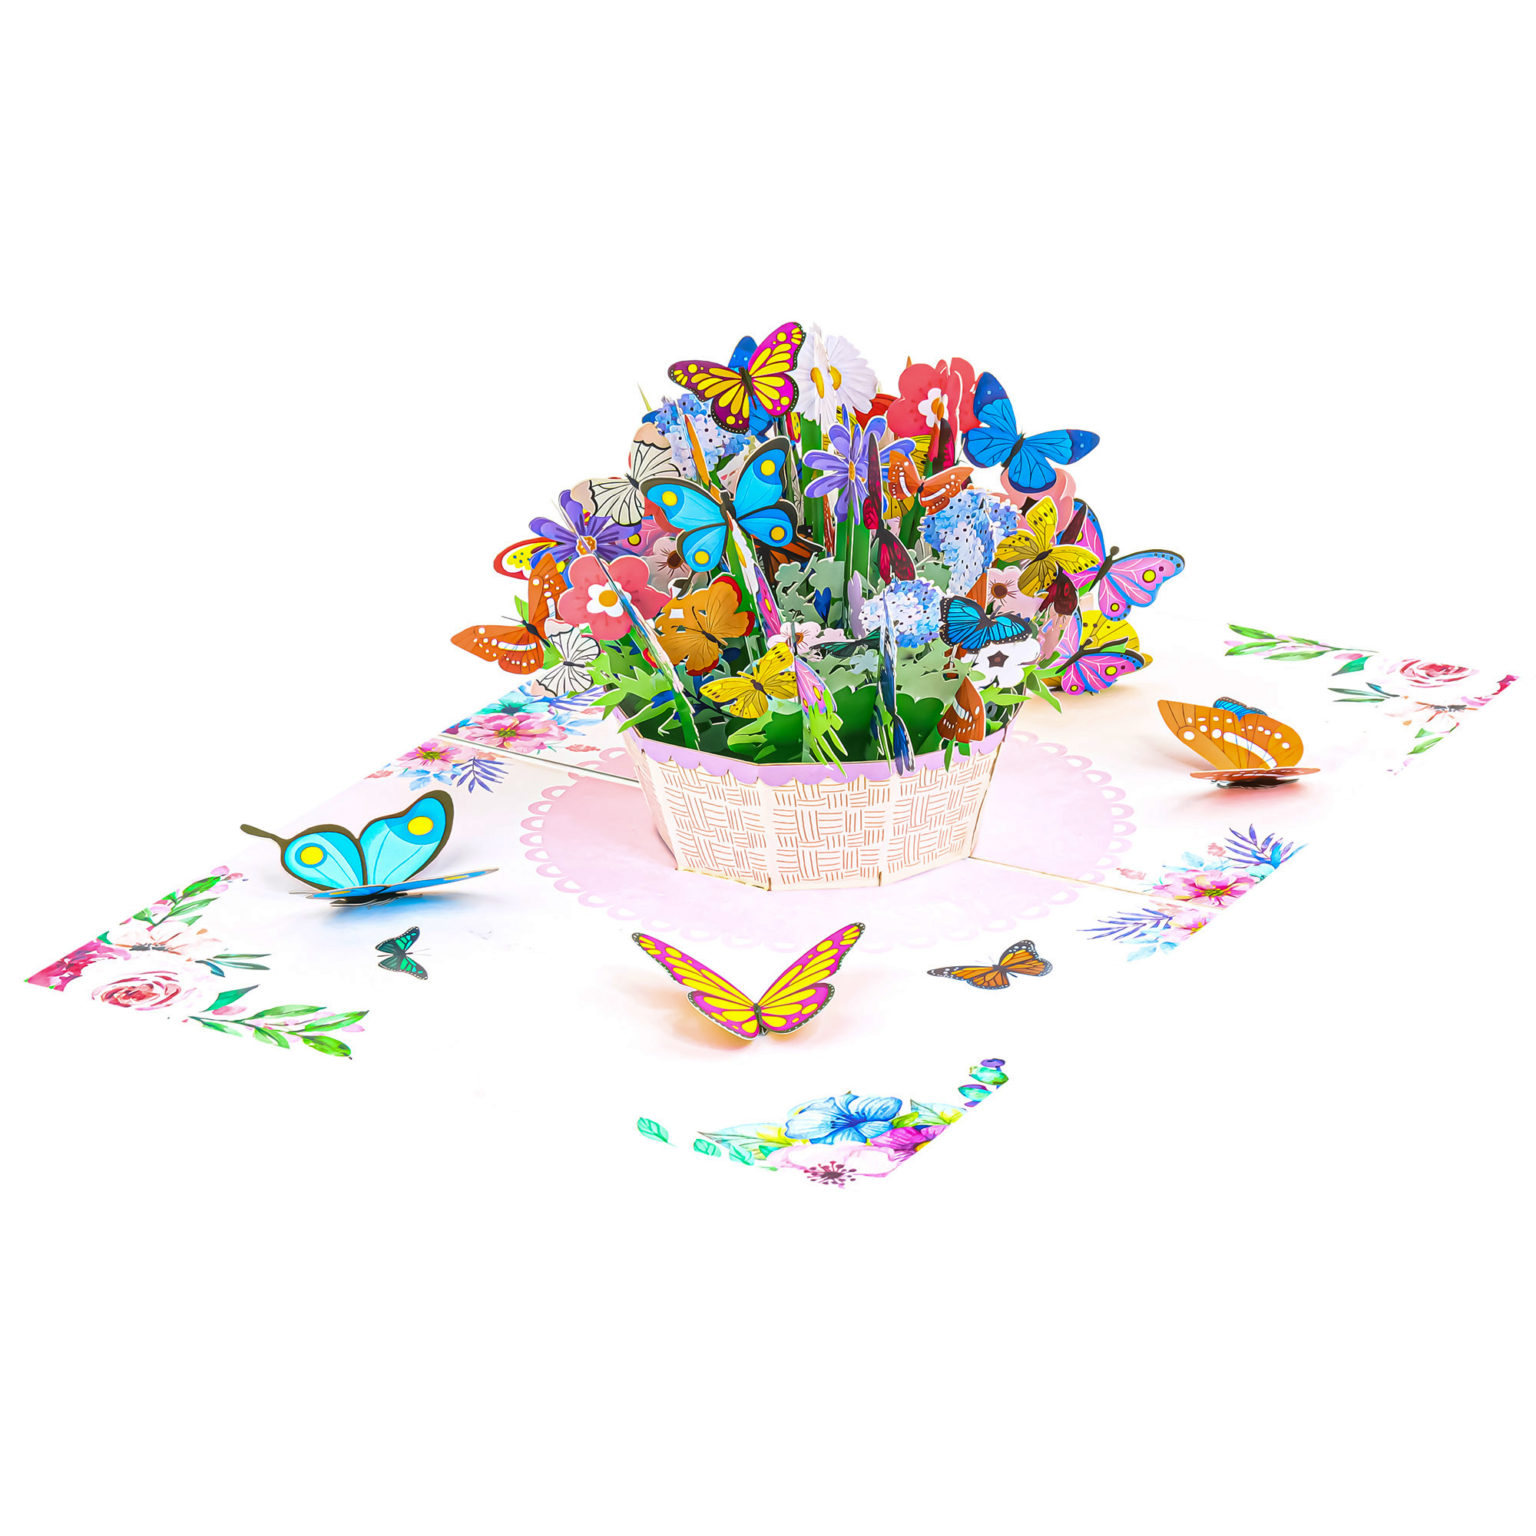 Wildflower-Butterflies-Pop-Up-Card-overview-wholesale-manufacture-custom-design-custom-mothers-day-card-pop-up-easter-cards